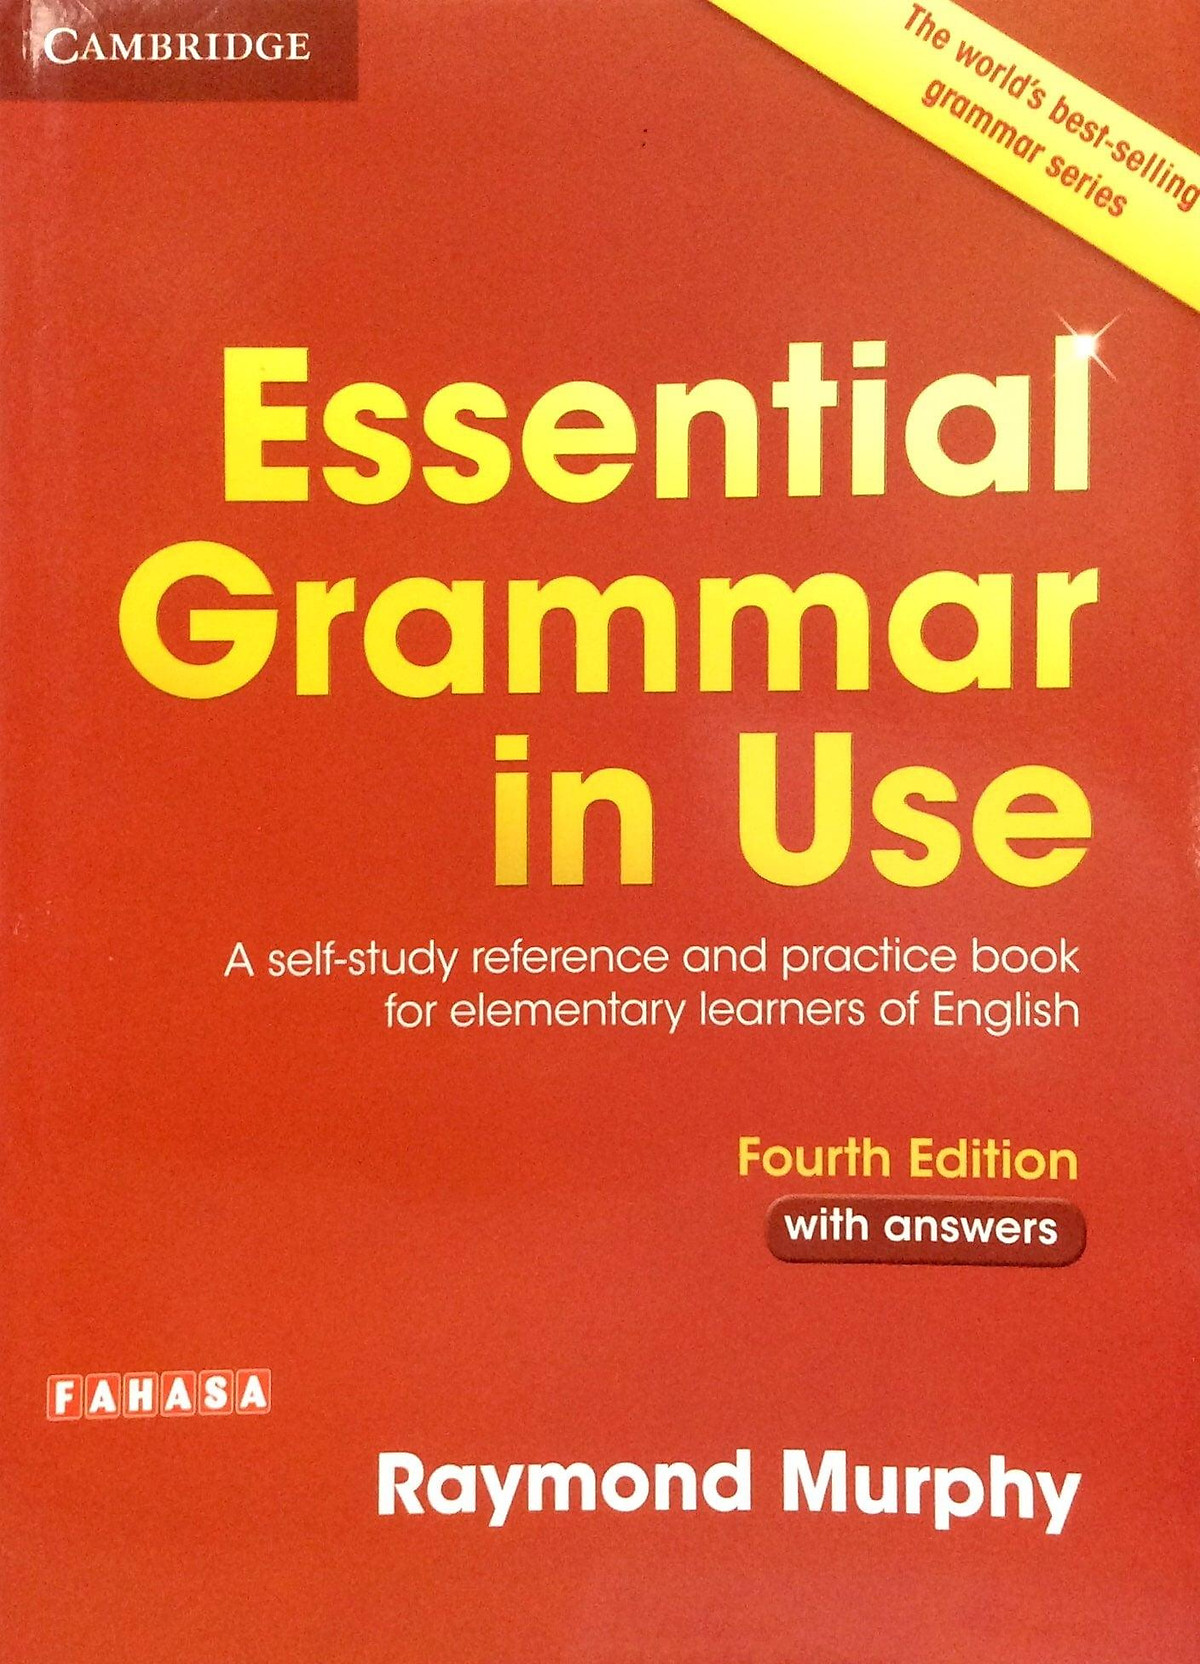 Essential Grammar in Use Book with Answers Edition: A Self-Study Reference and Practice Book for Elementary Learners of English